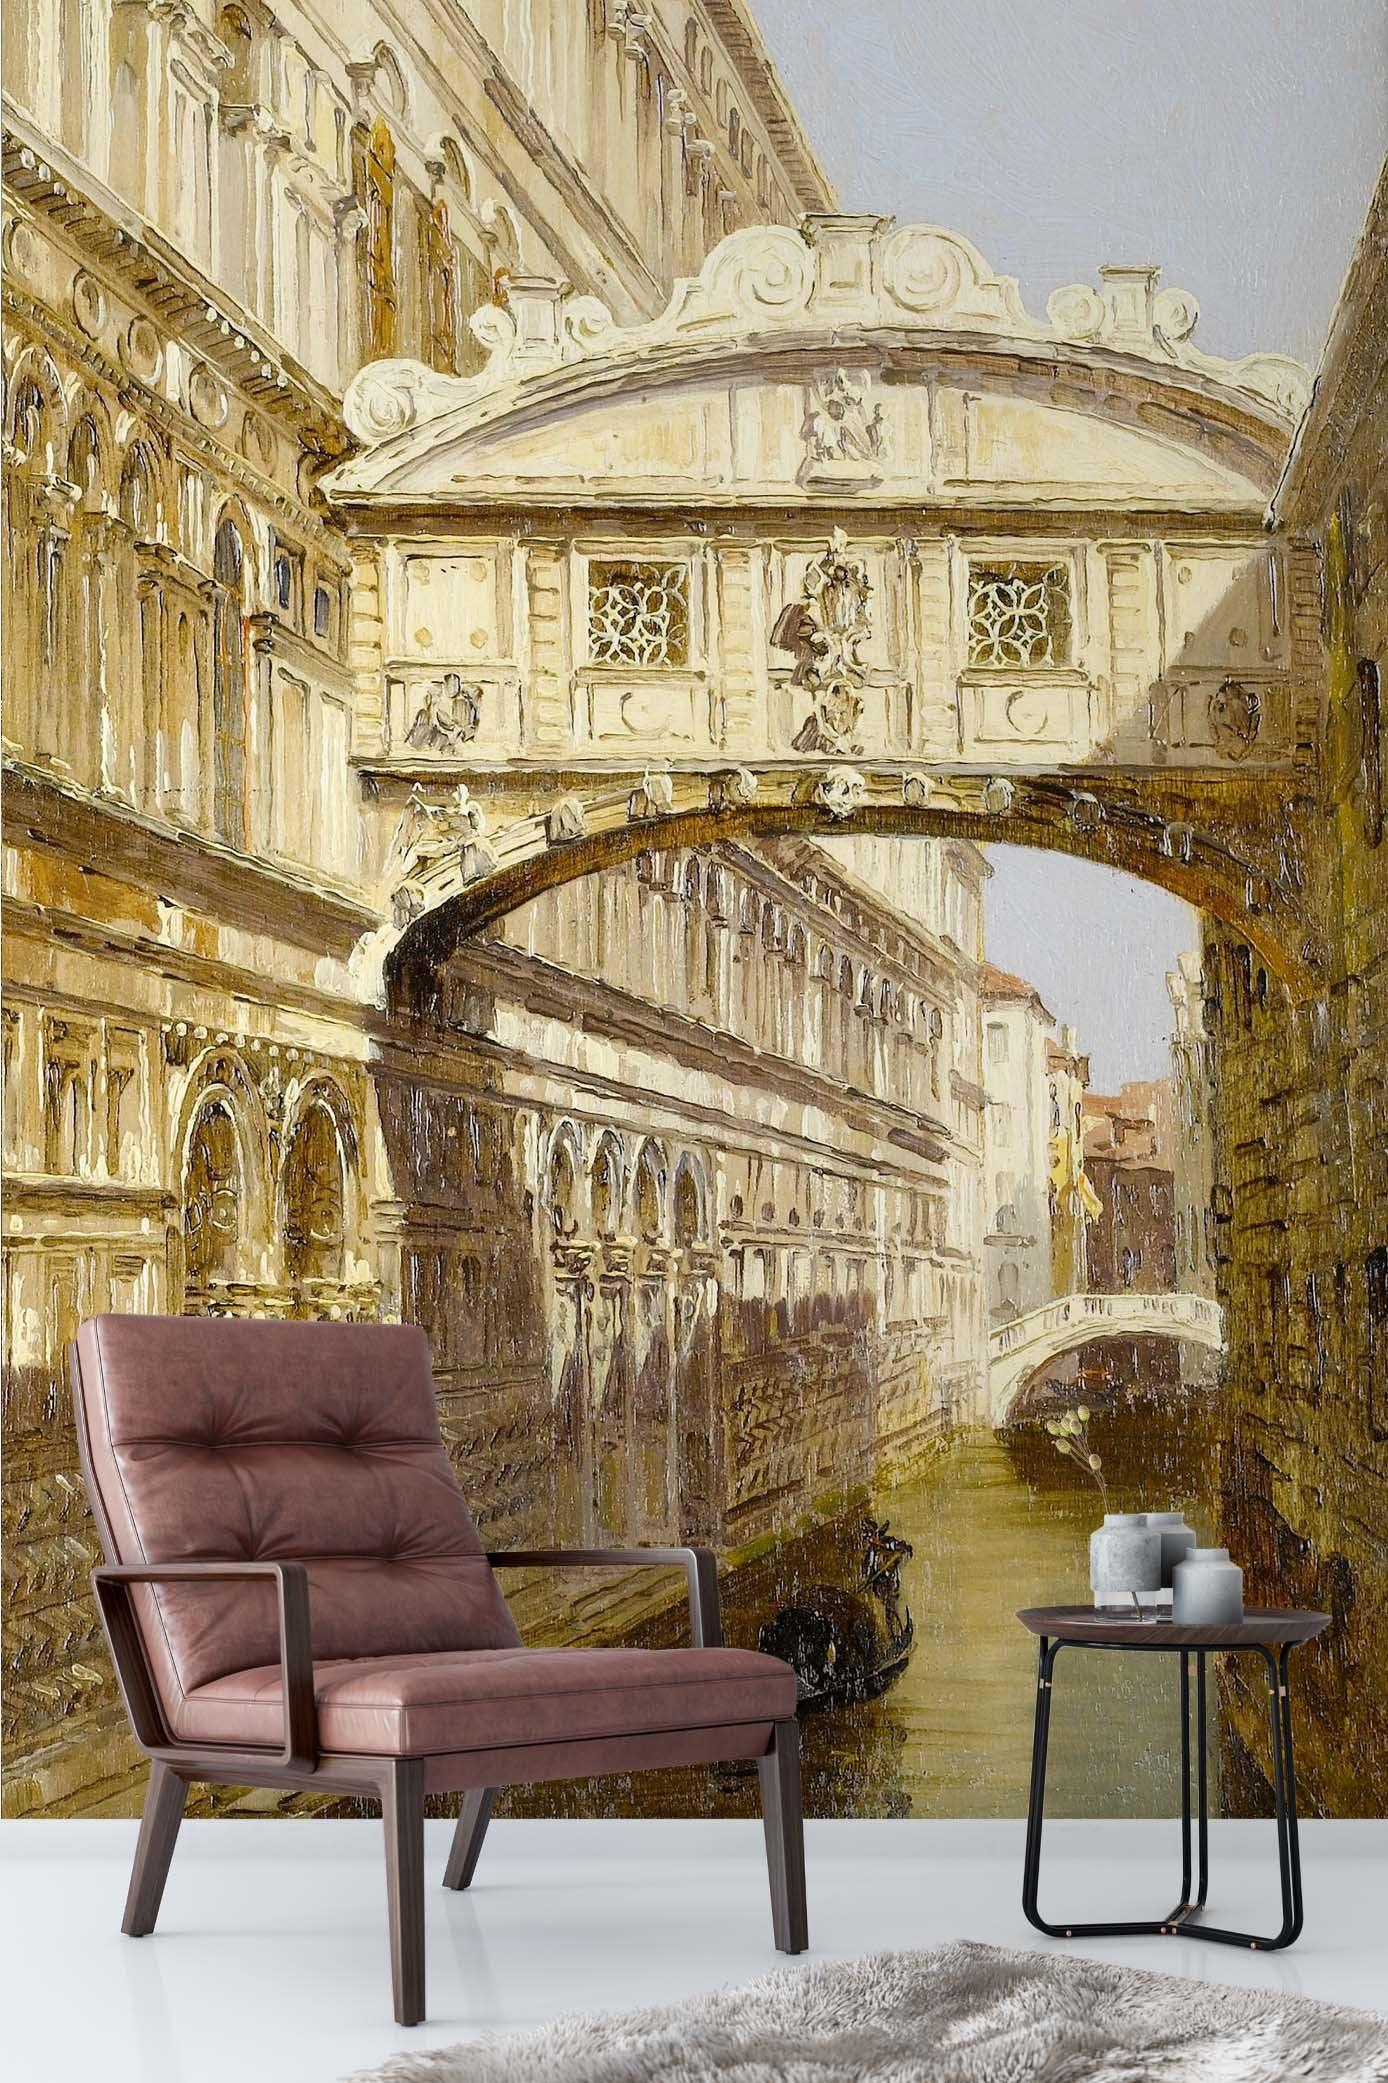 3D retro european style architecture oil painting wall mural wallpaper 92- Jess Art Decoration